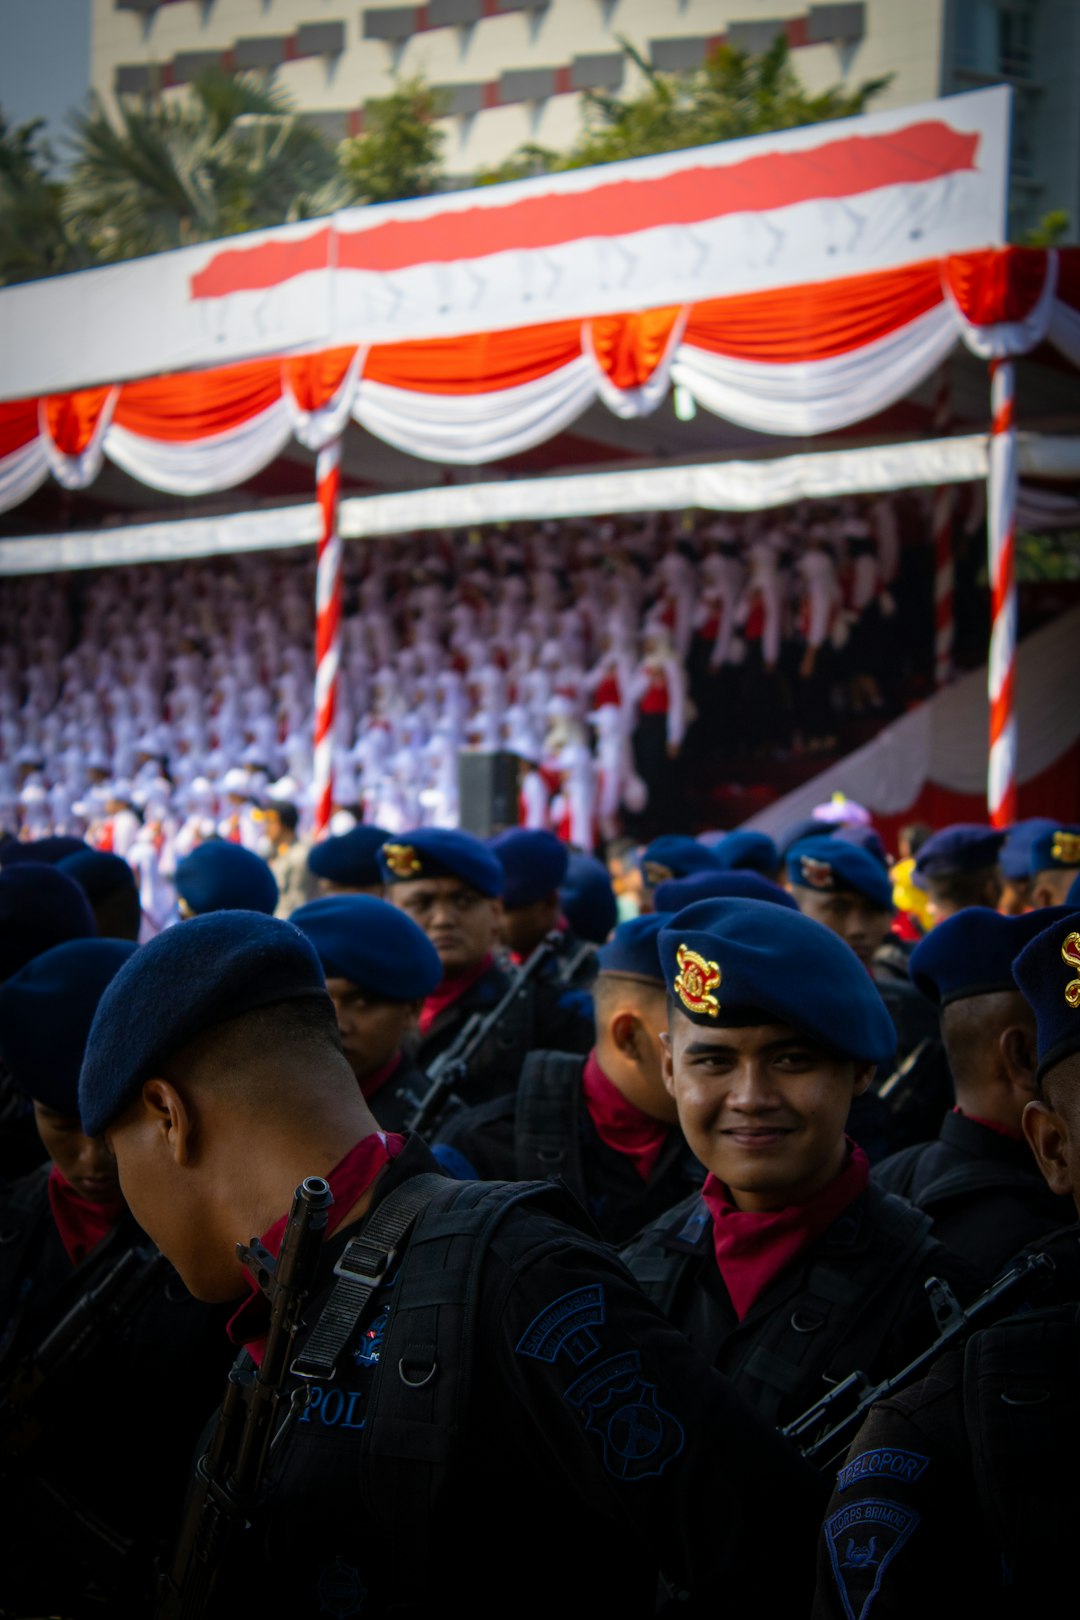 Surabaya, Indonesia - Aug 17, 2019: We are celebrating Independence day of Indonesia. this photo was taken at the ceremonial event in Surabaya.